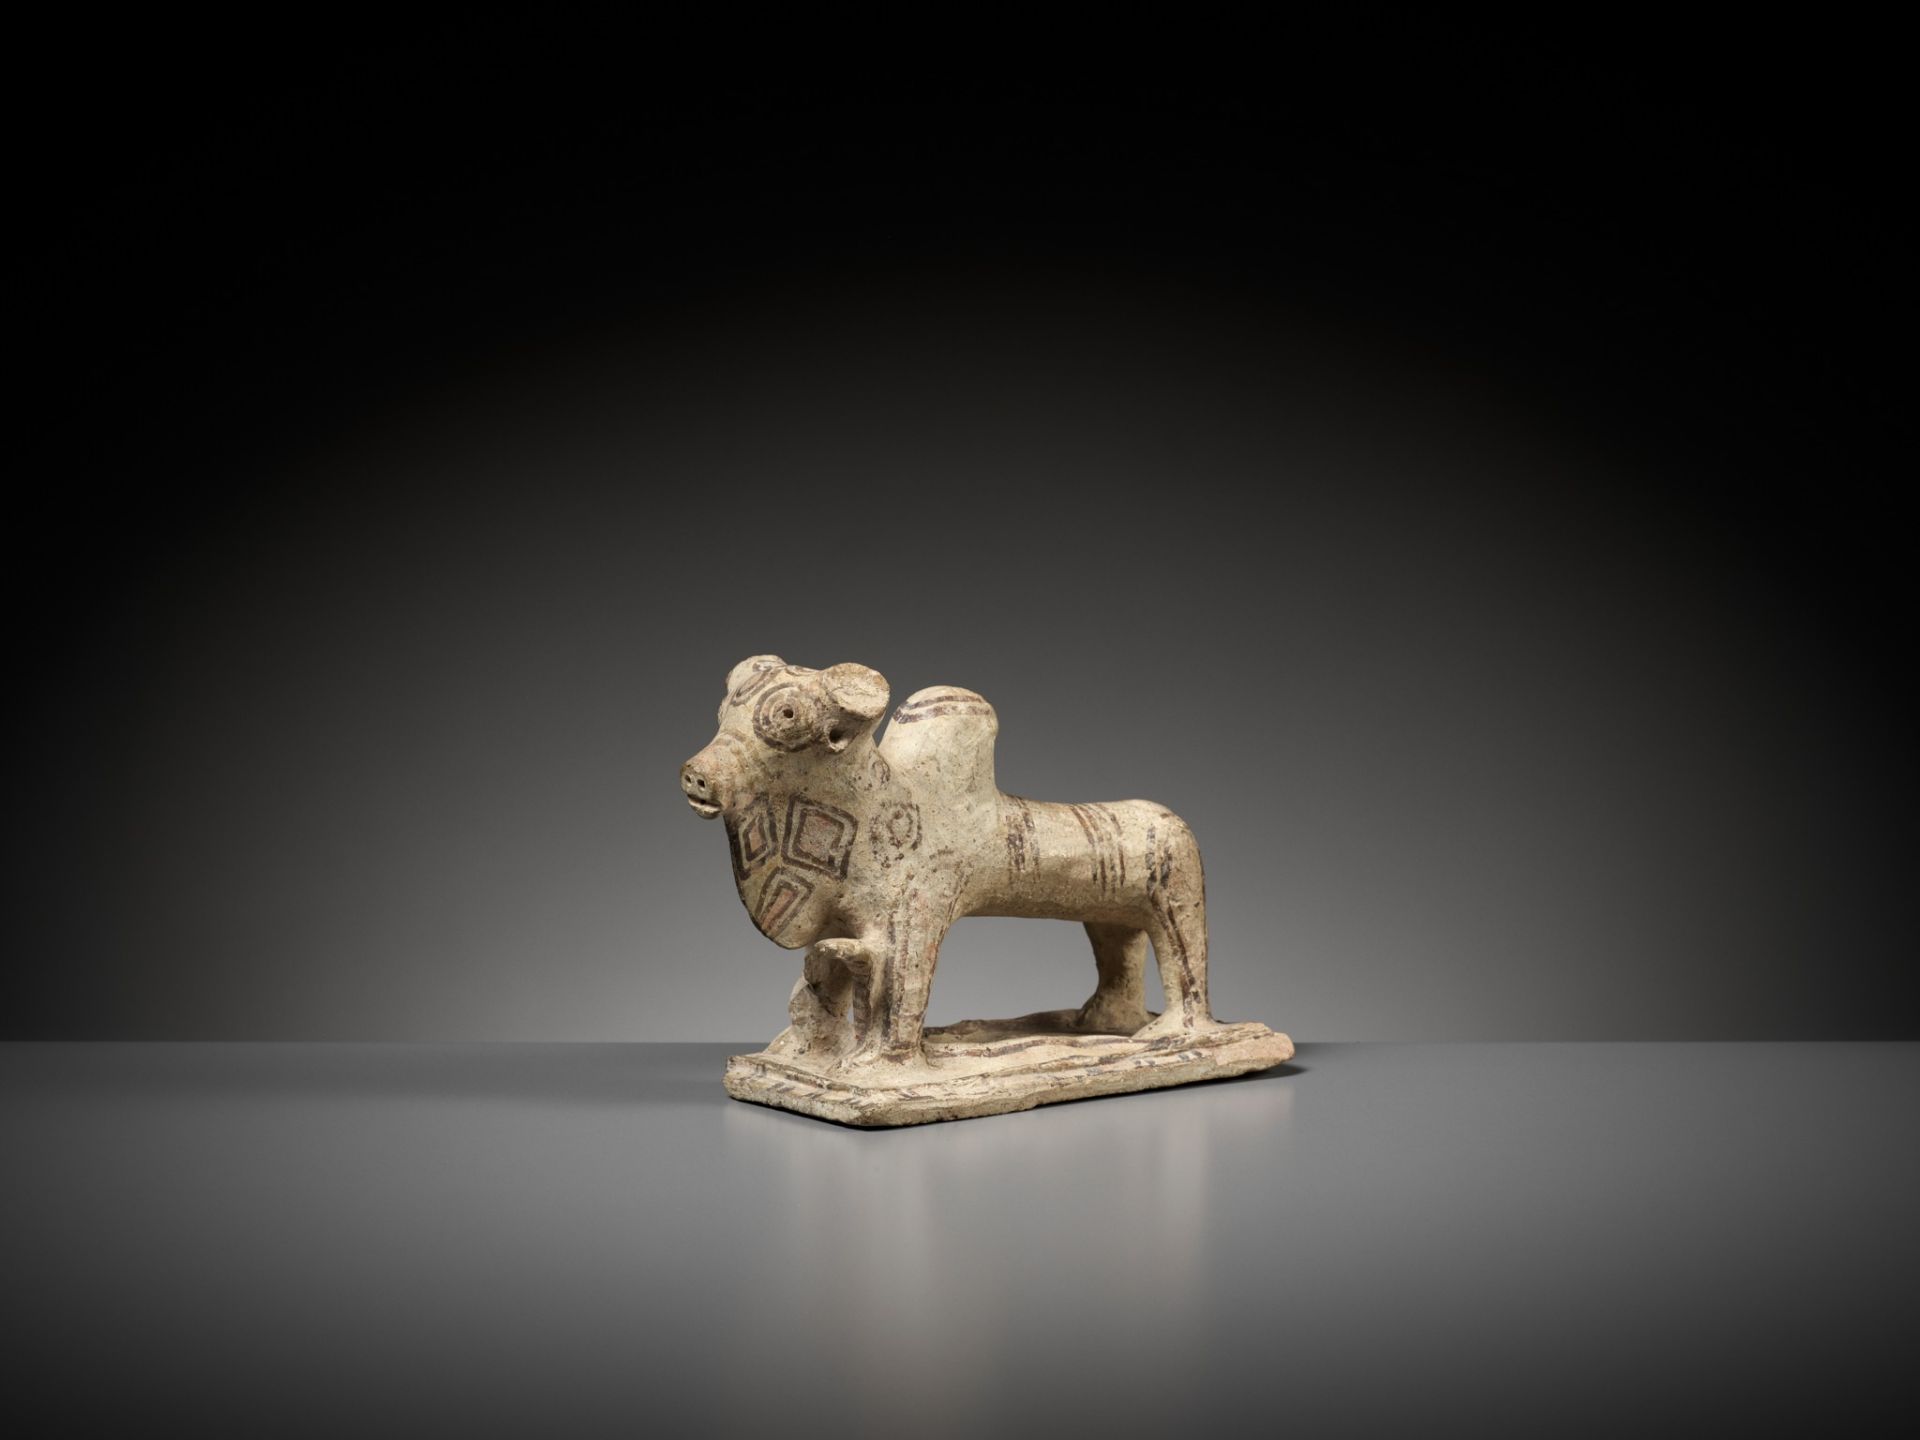 A PAINTED TERRACOTTA FIGURE OF A HUMPED OX, MOHENJO-DARO - Image 3 of 12